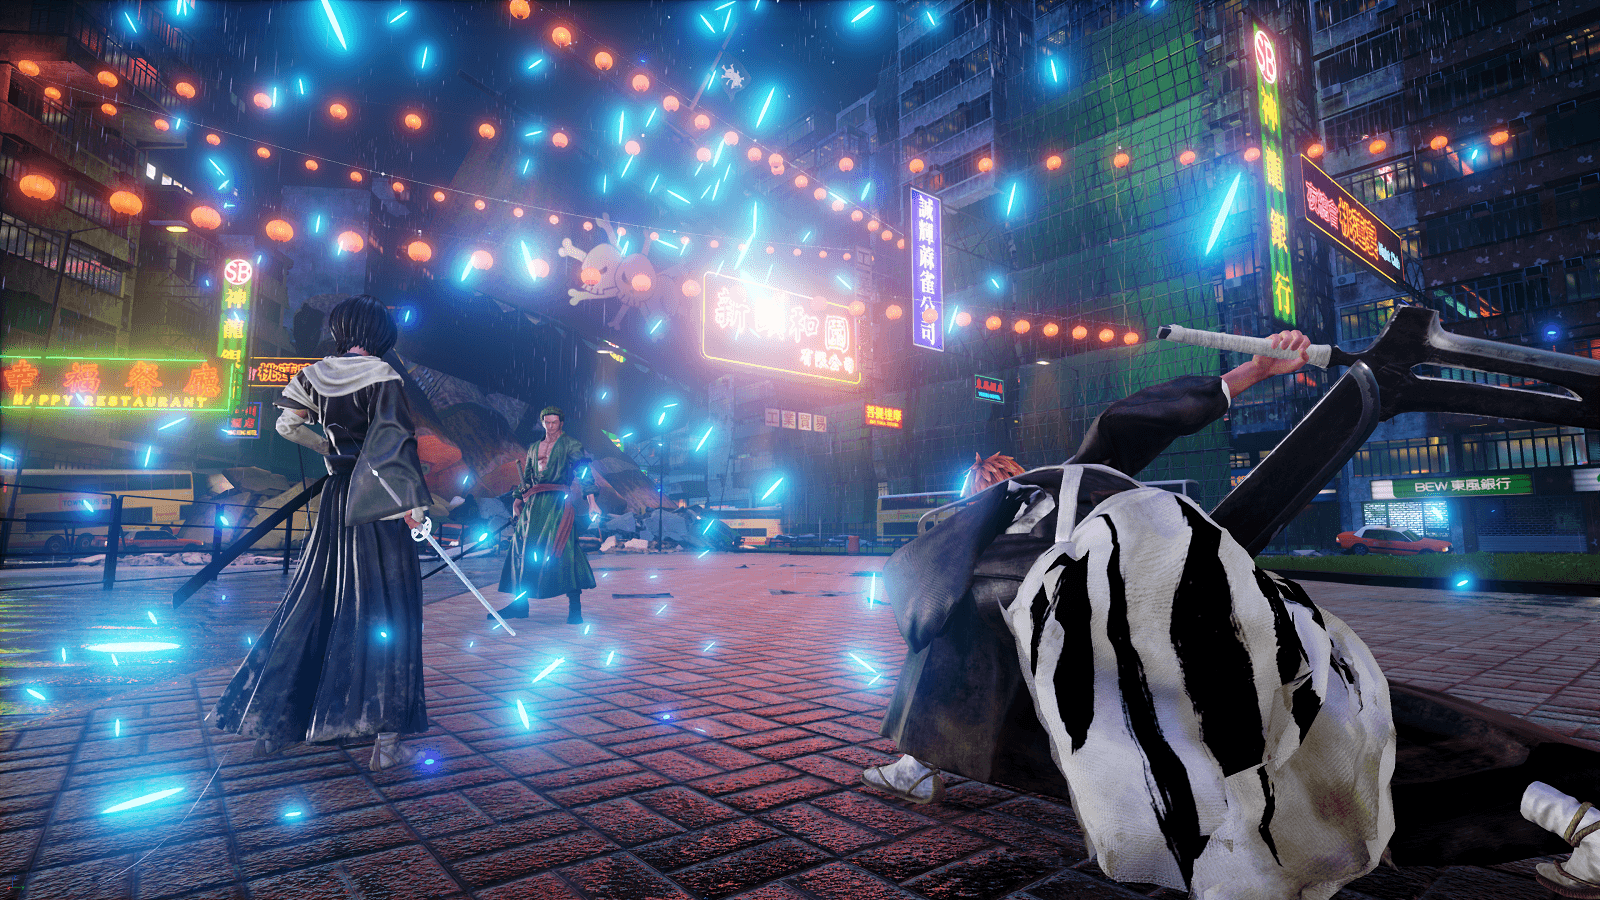 Reap souls in Hong Kong, Bleach characters announced for Jump Force